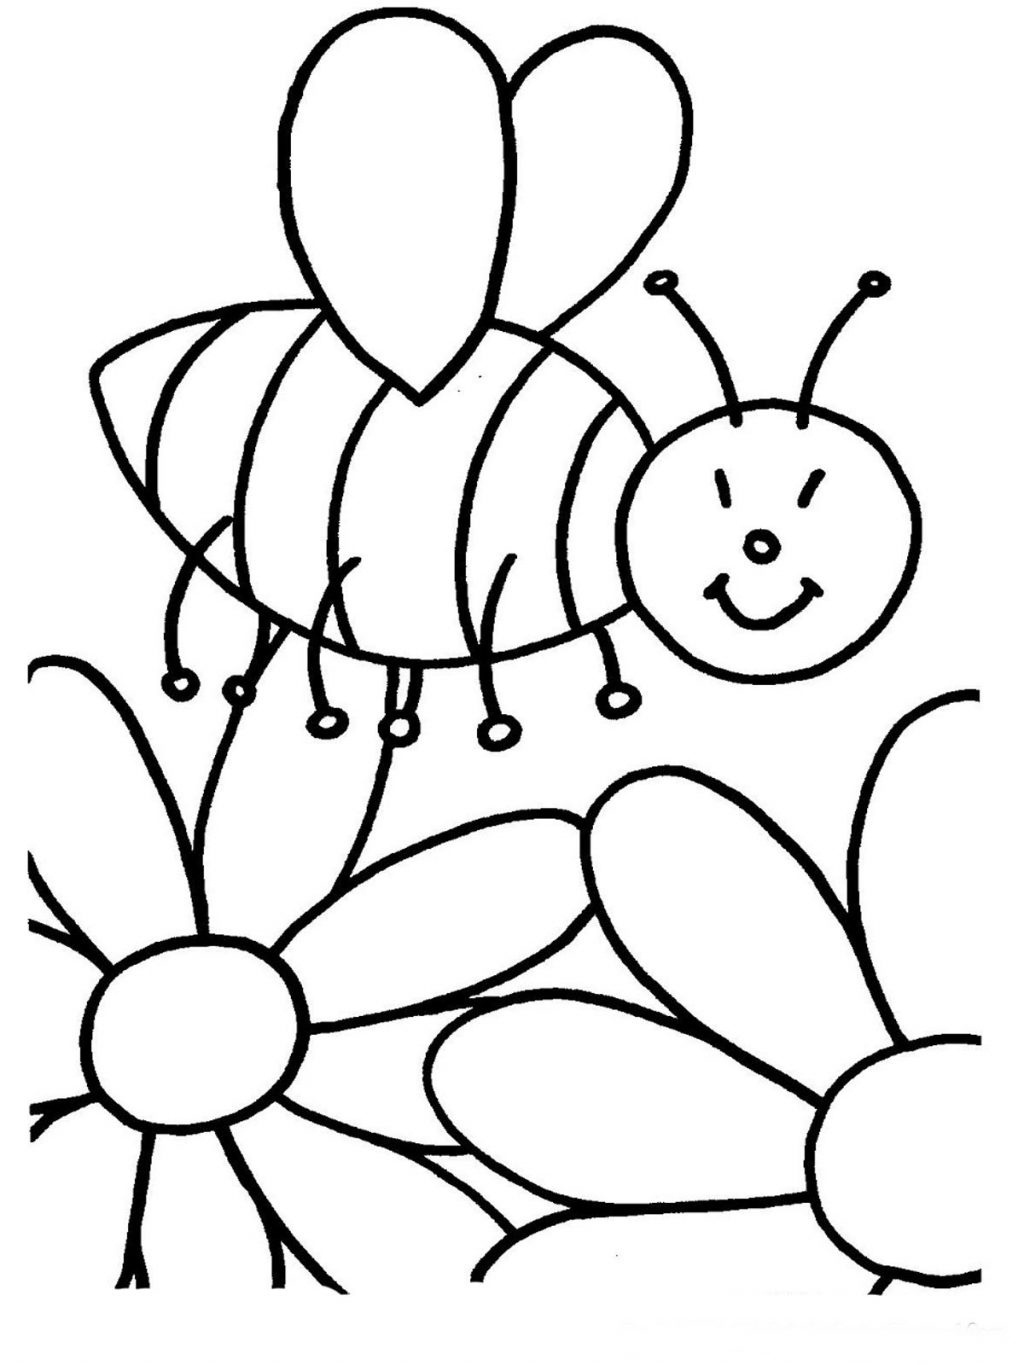 Coloring Page ~ Free Printable Coloring Pages For Toddlers Kid On - Free Printable Coloring Books For Toddlers